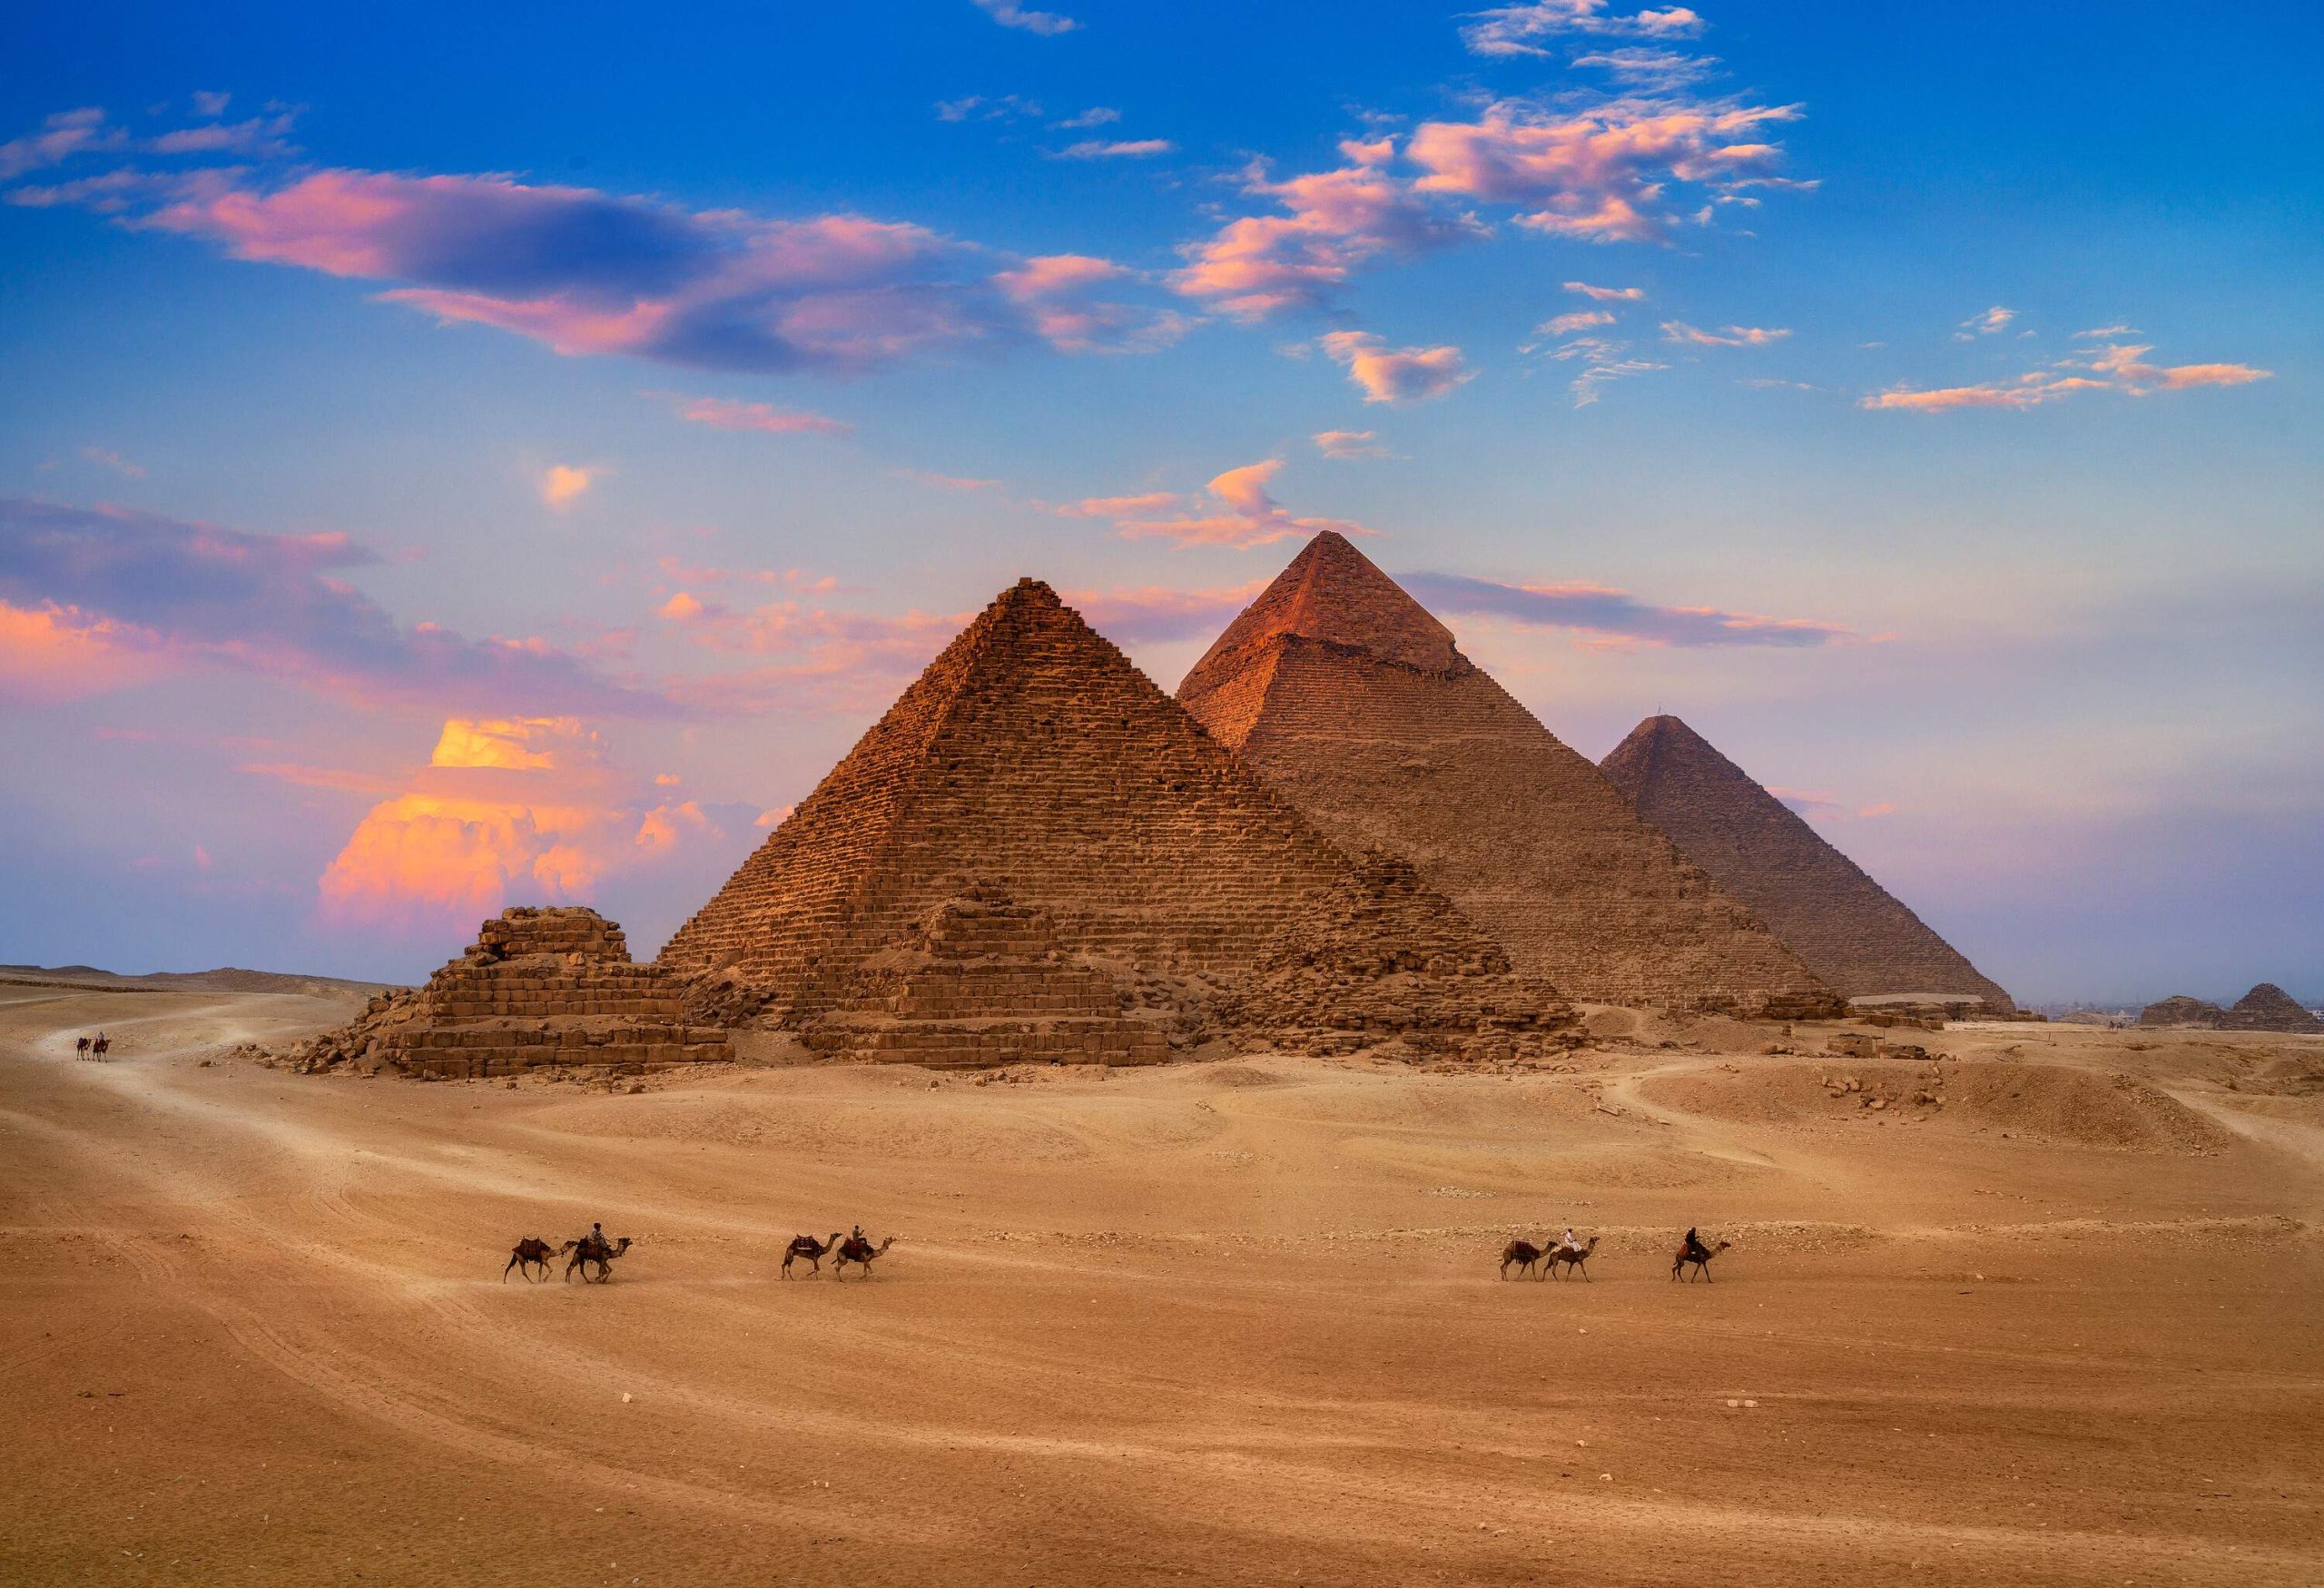 A picturesque view of the famous Giza Egypt Pyramids against the scenic sunset sky.